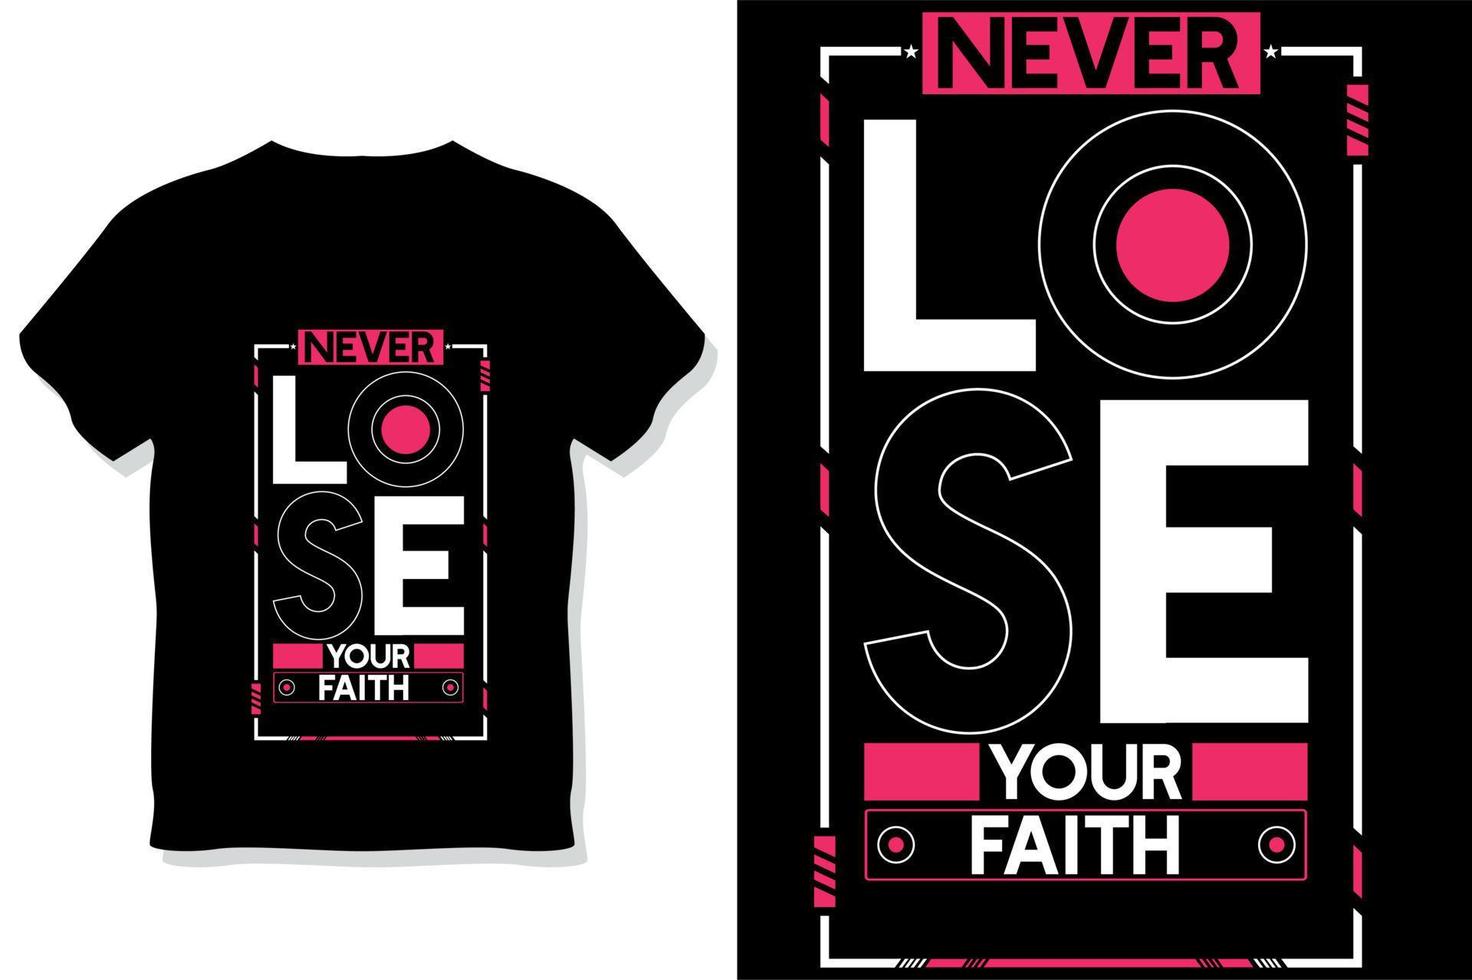 never lose your faith  motivational quote typography t shirt design vector